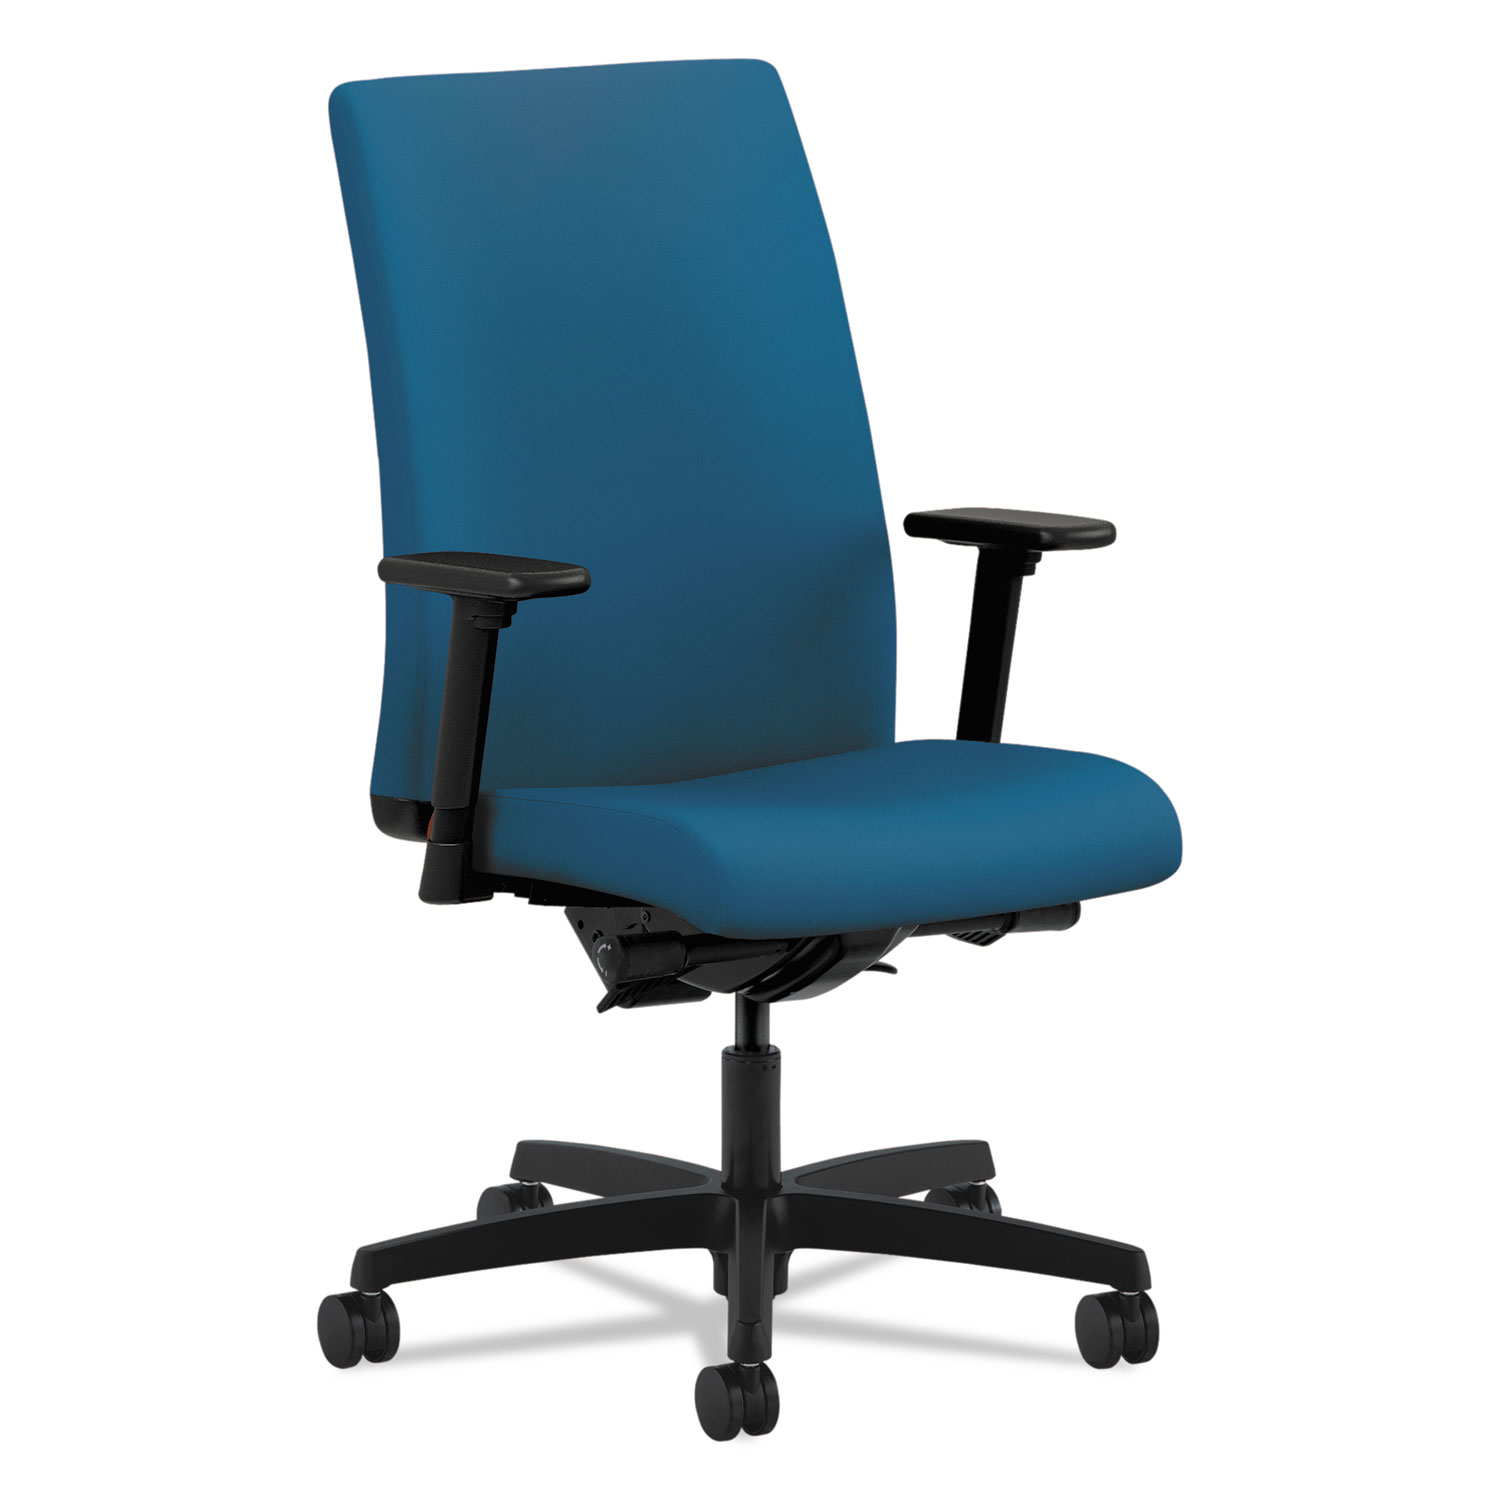  HON HIWM3.A.H.U.CU97.T.SB Ignition Series Mid-Back Work Chair, Supports up to 300 lbs., Peacock Seat/Peacock Back, Black Base (HONIW104CU97) 